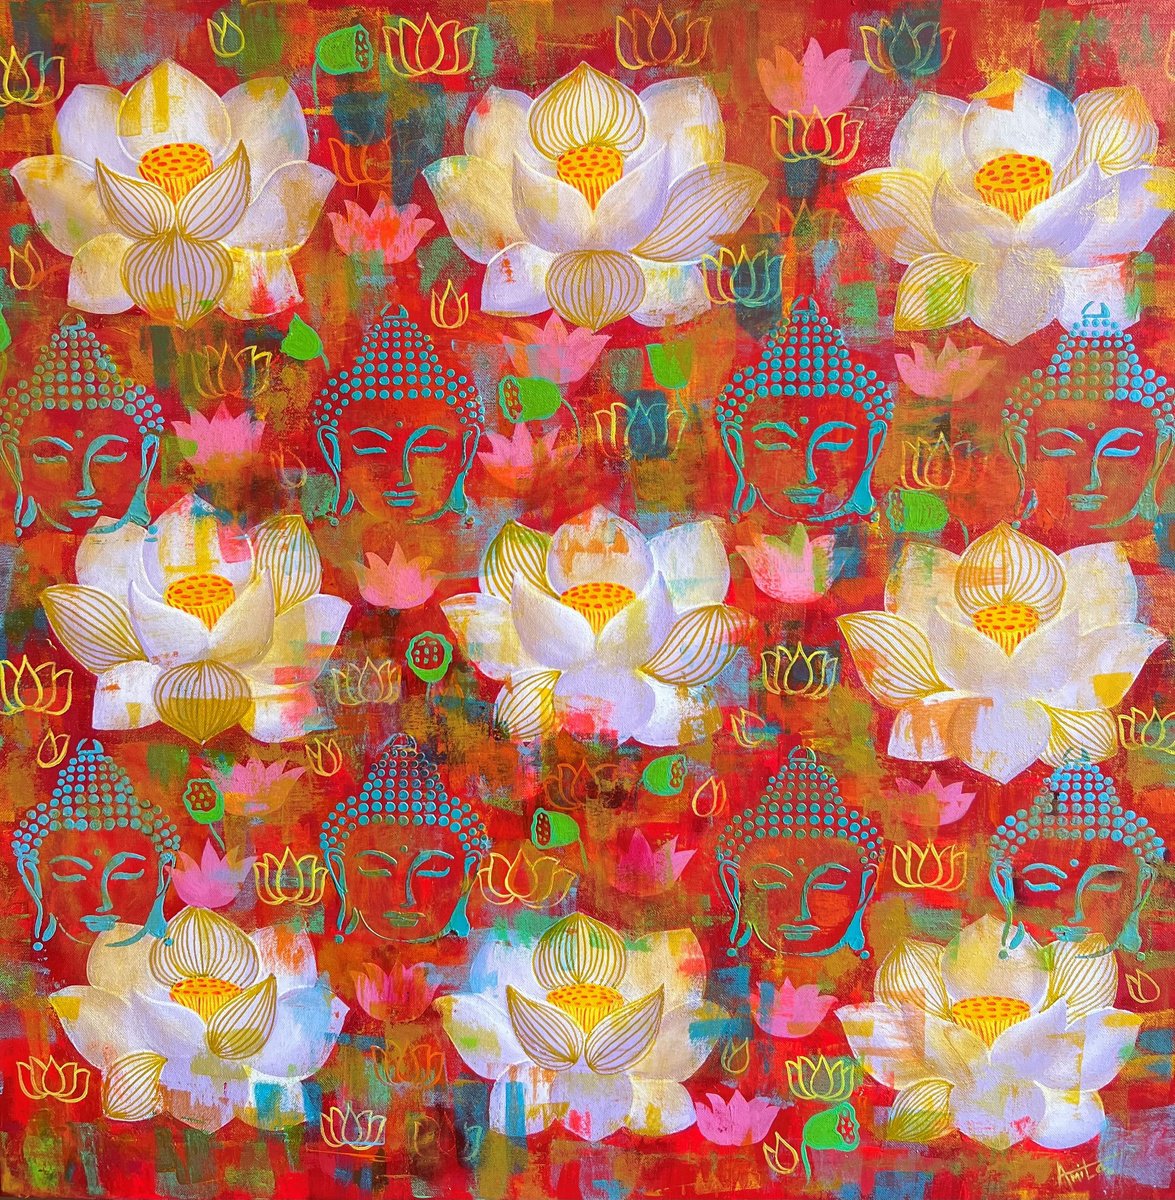 The Lotus Sutra by Amita Dand